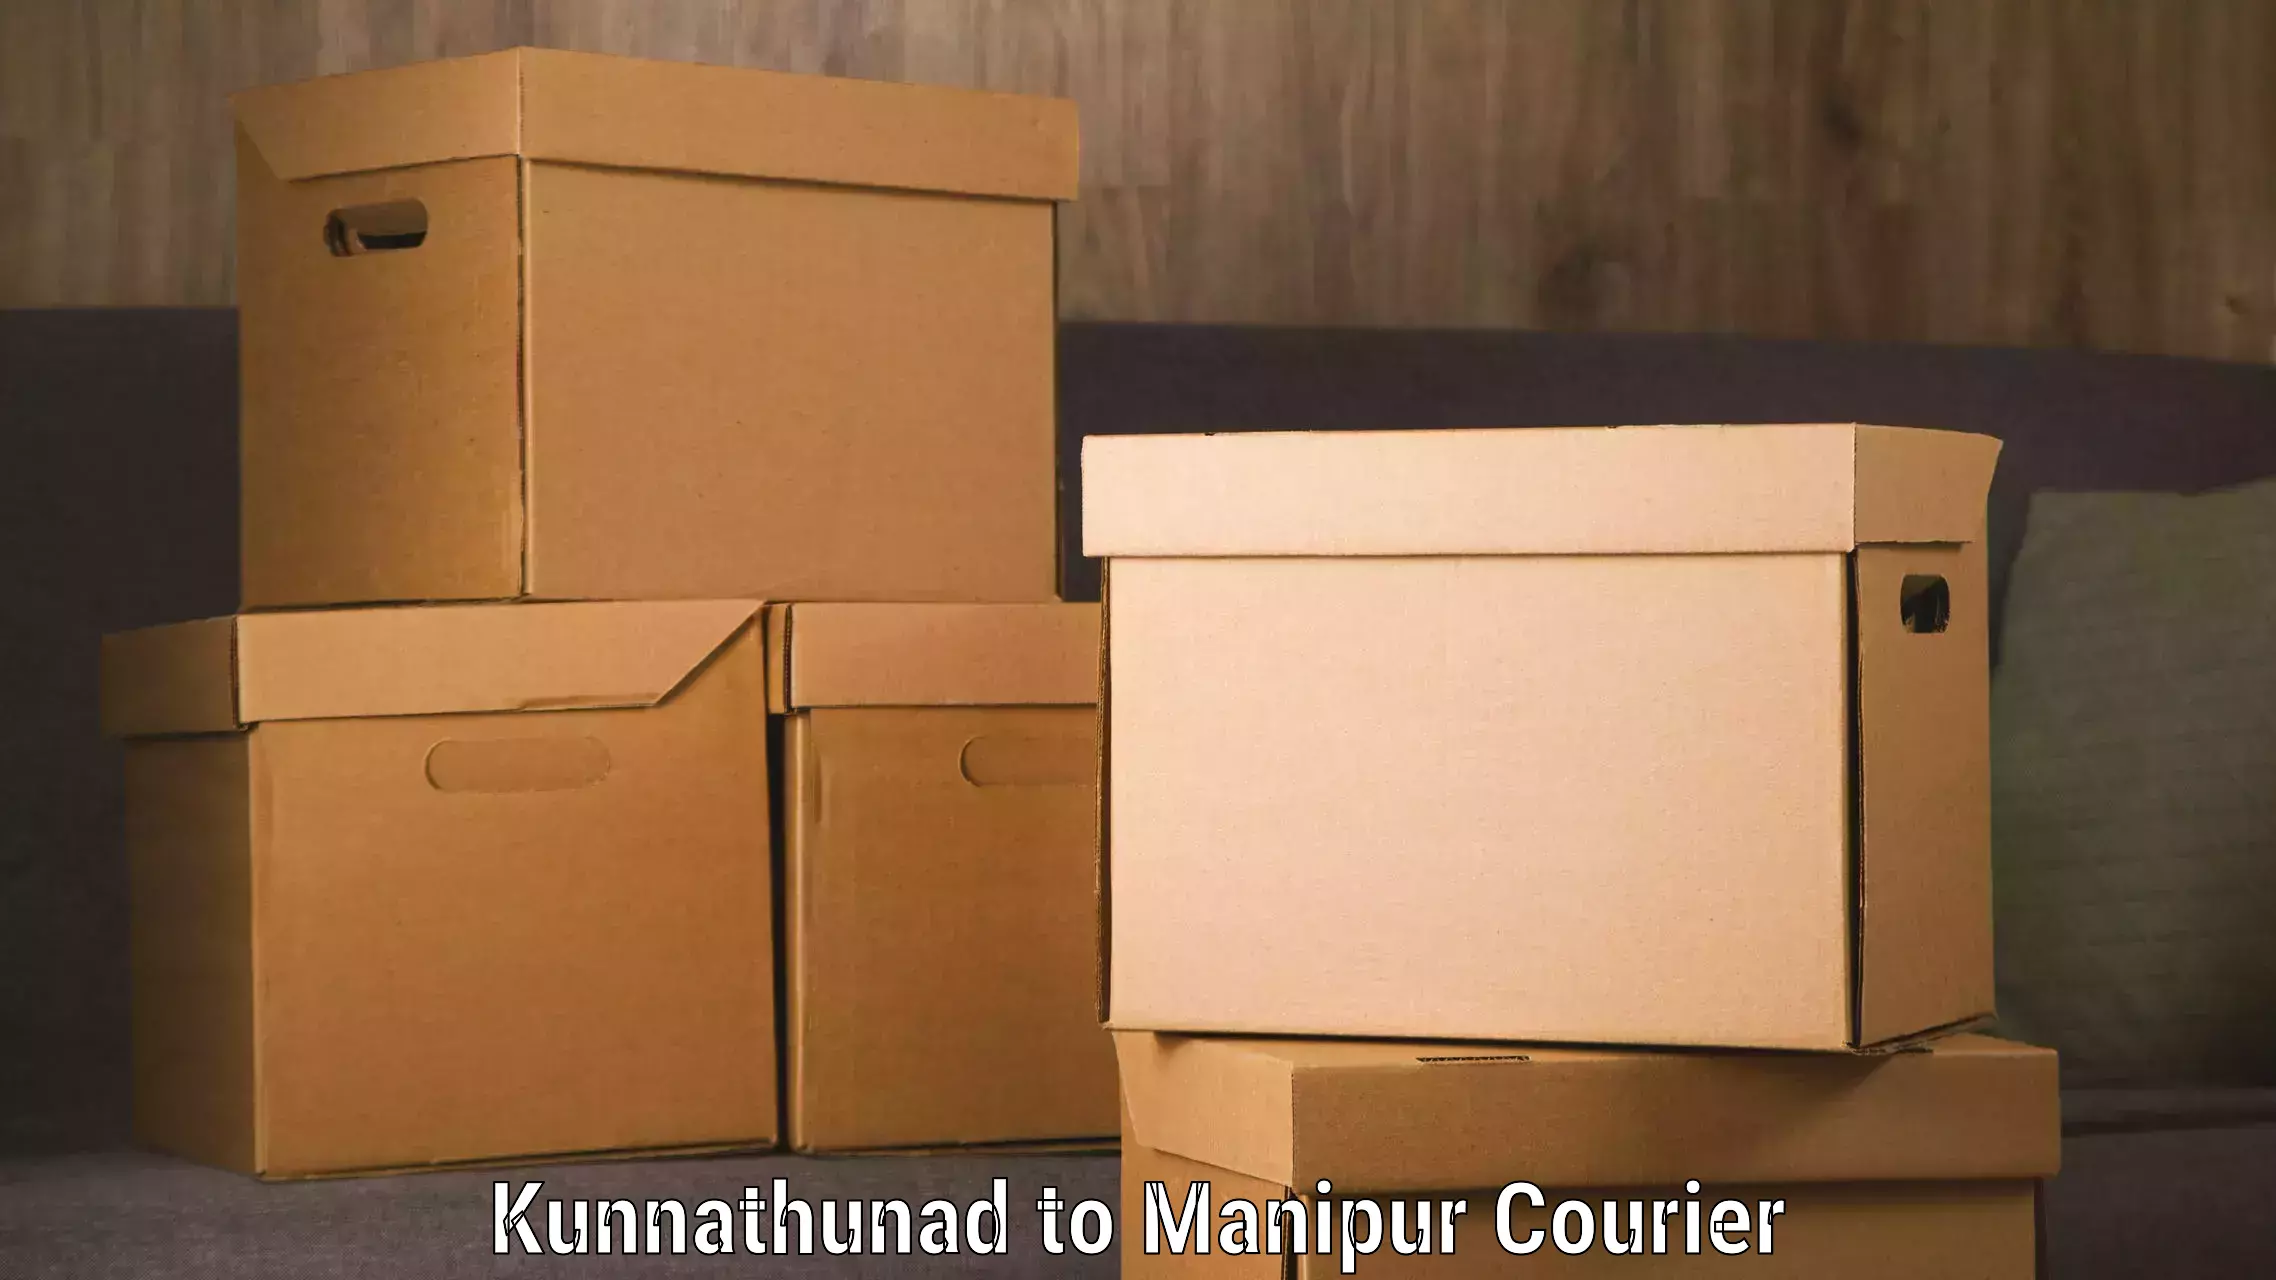 Package delivery network Kunnathunad to Manipur